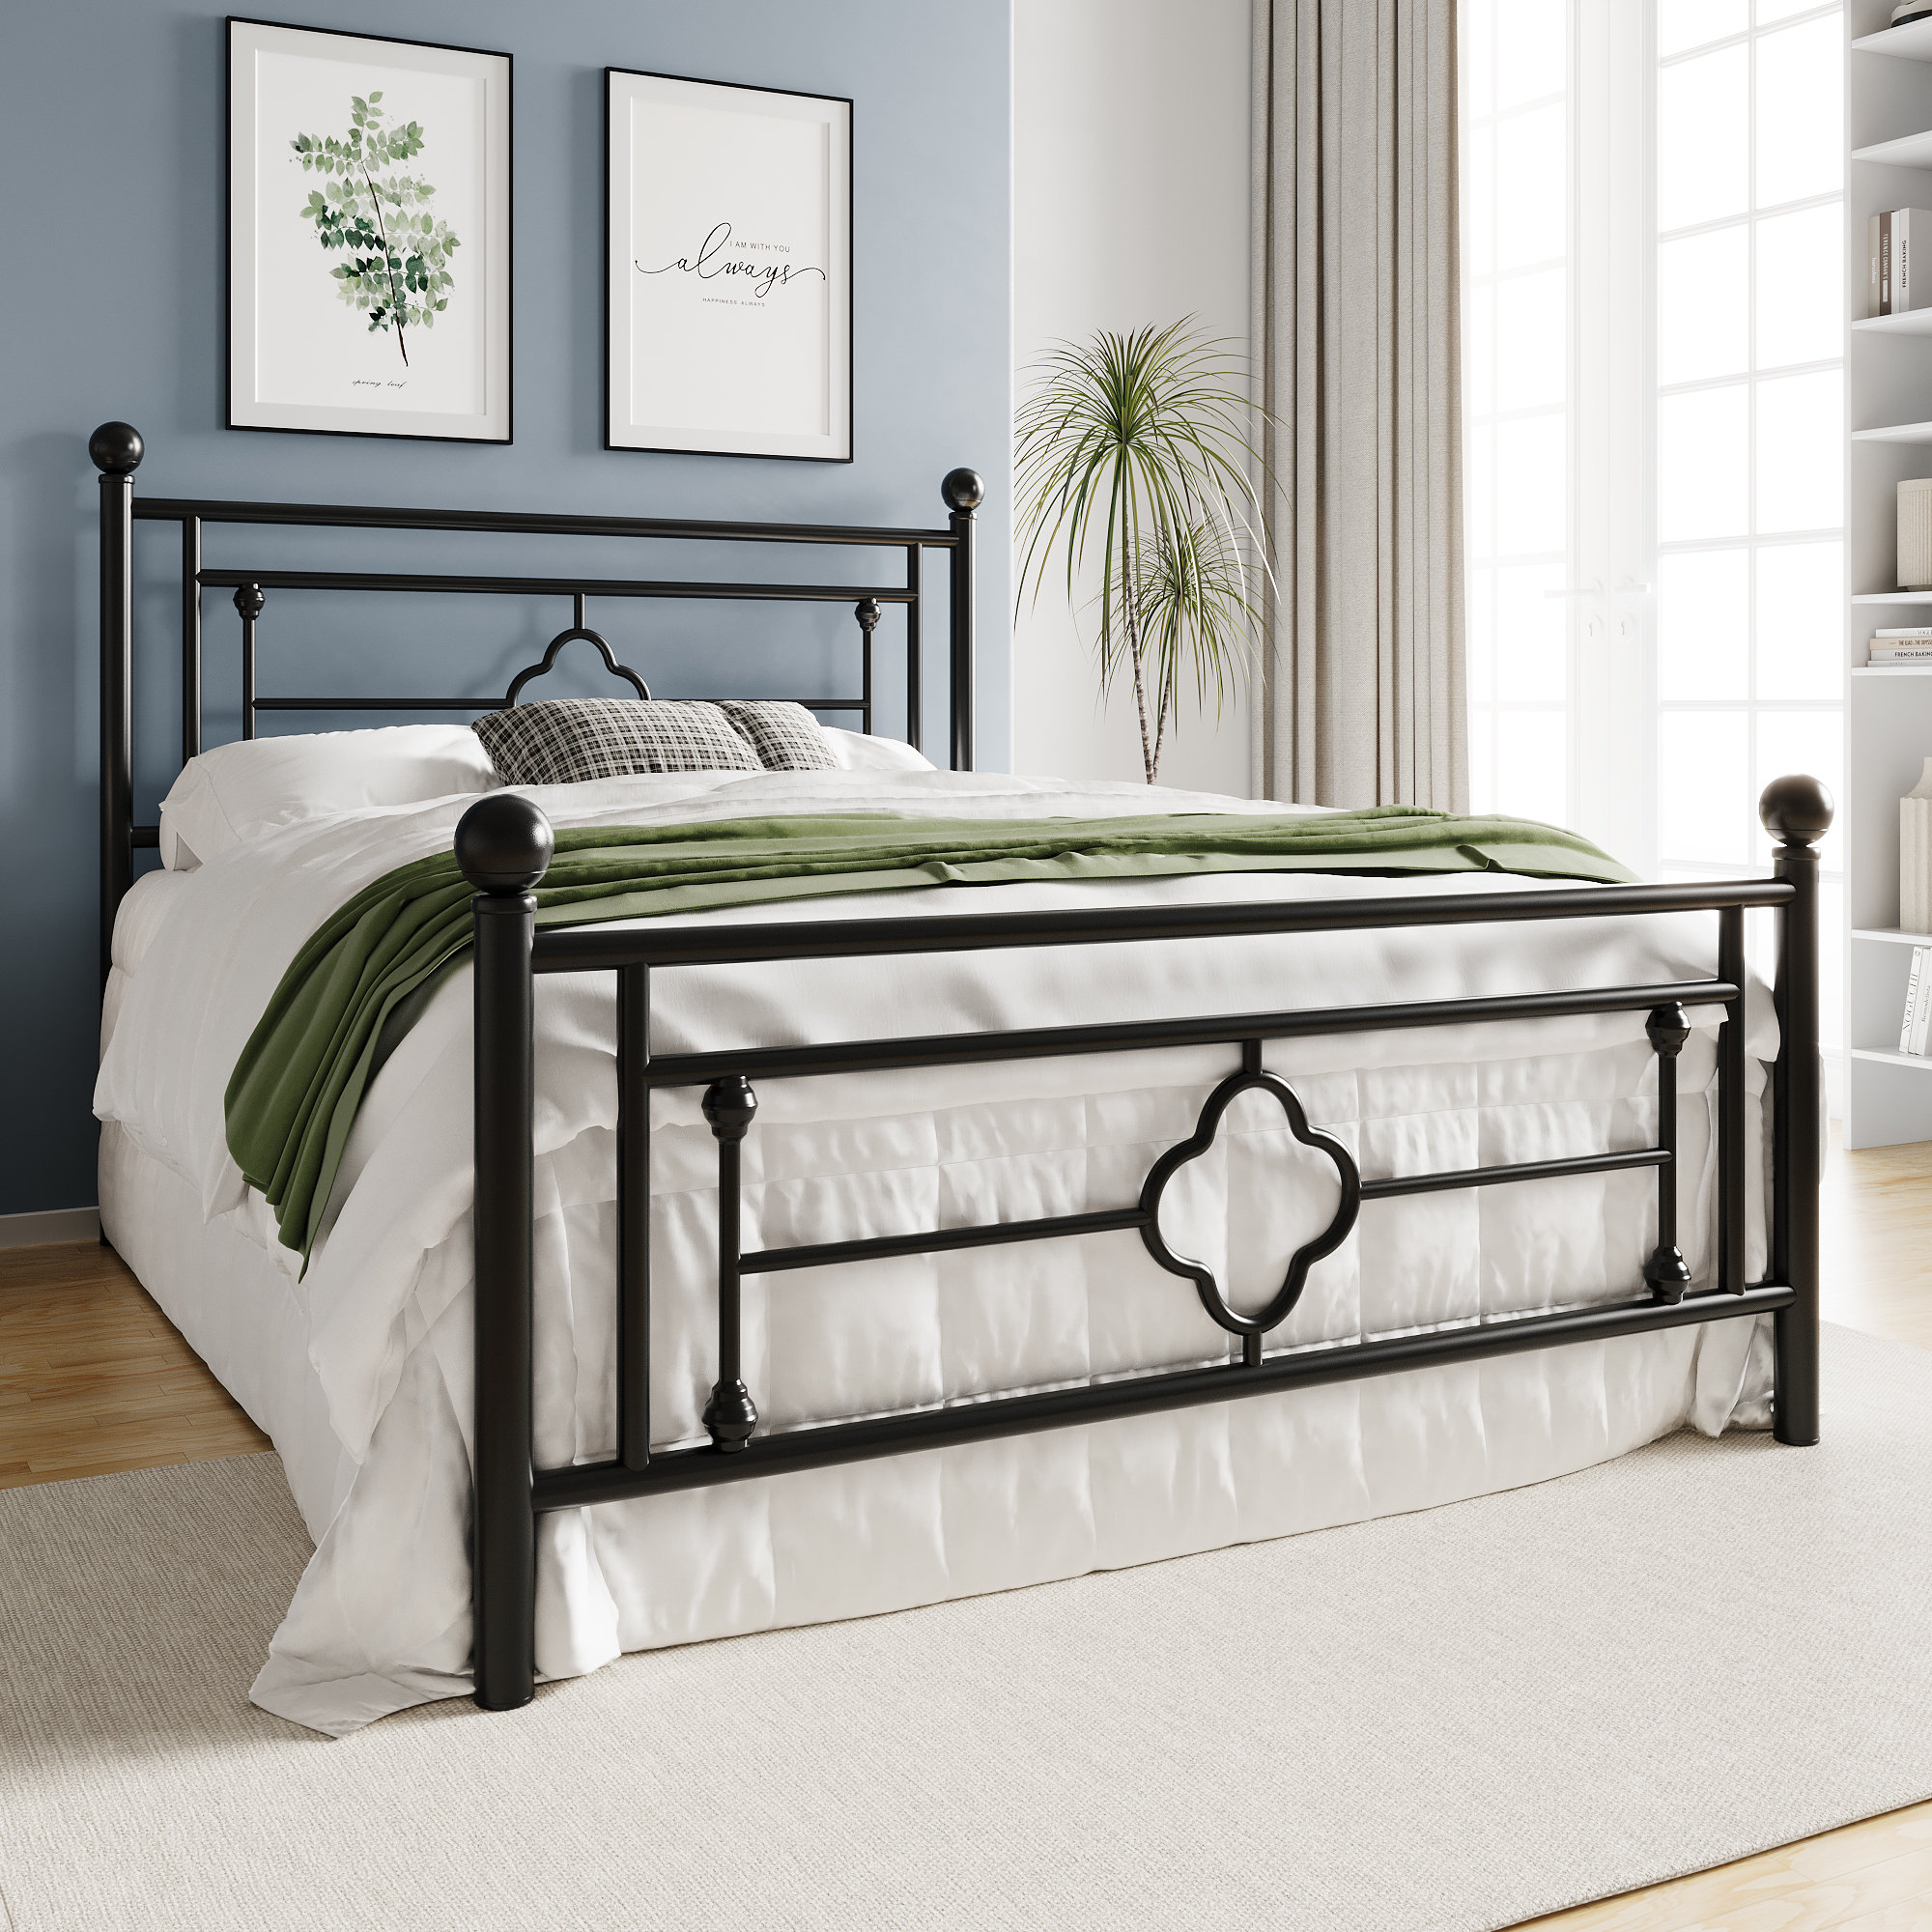 Brass Headboard Twin Size Bed/Reduced Price - furniture - by owner